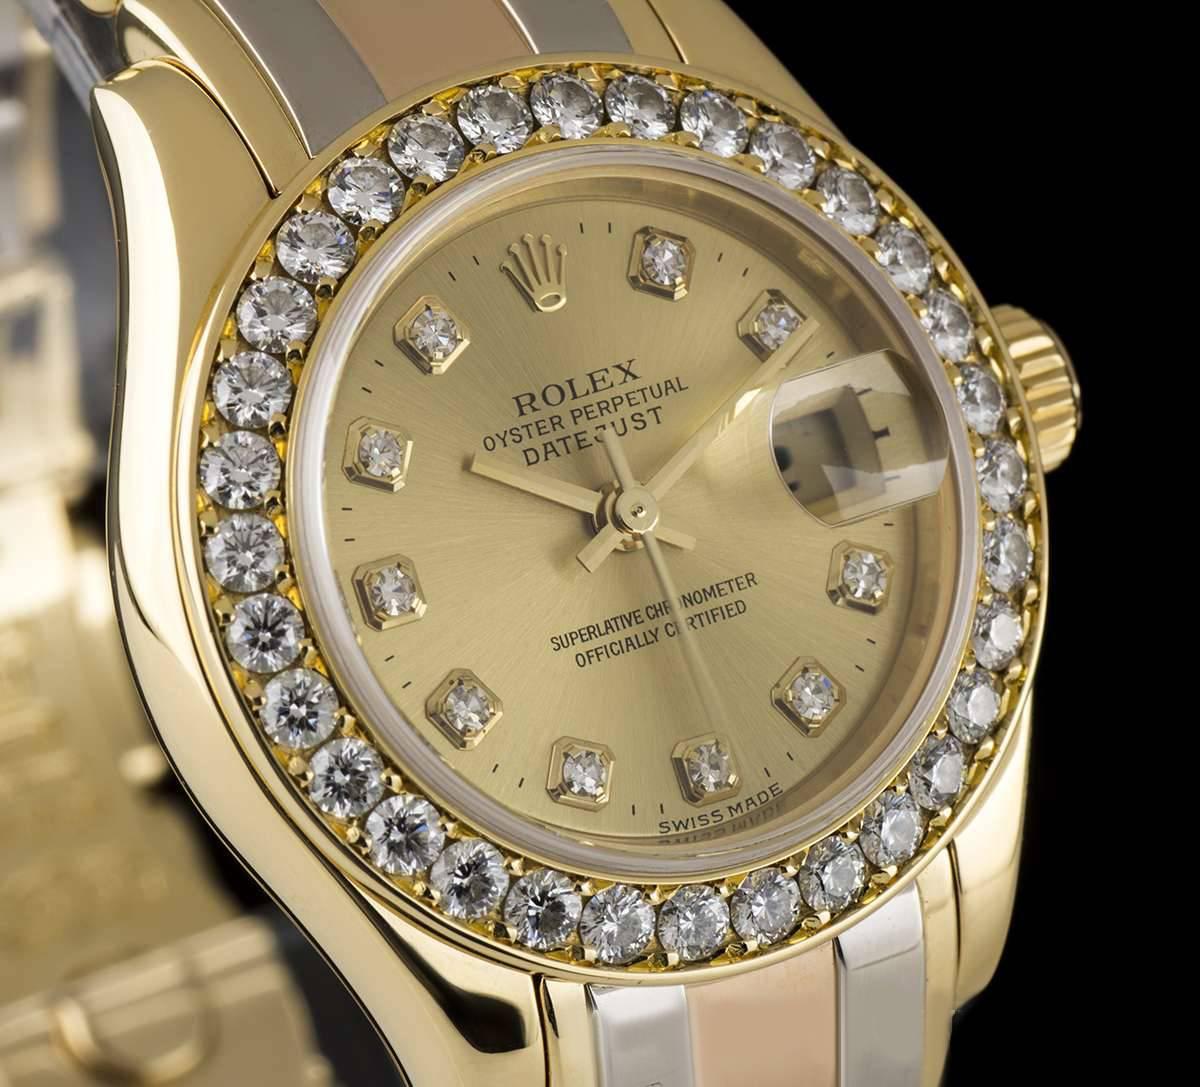 A Gold Tridor Oyster Perpetual Datejust Ladies Wristwatch, champagne dial with 10 applied round brilliant cut diamond hour markers, date at 3 0'clock, a fixed  yellow gold bezel set with approximately 32 round brilliant diamonds, an 18k tridor